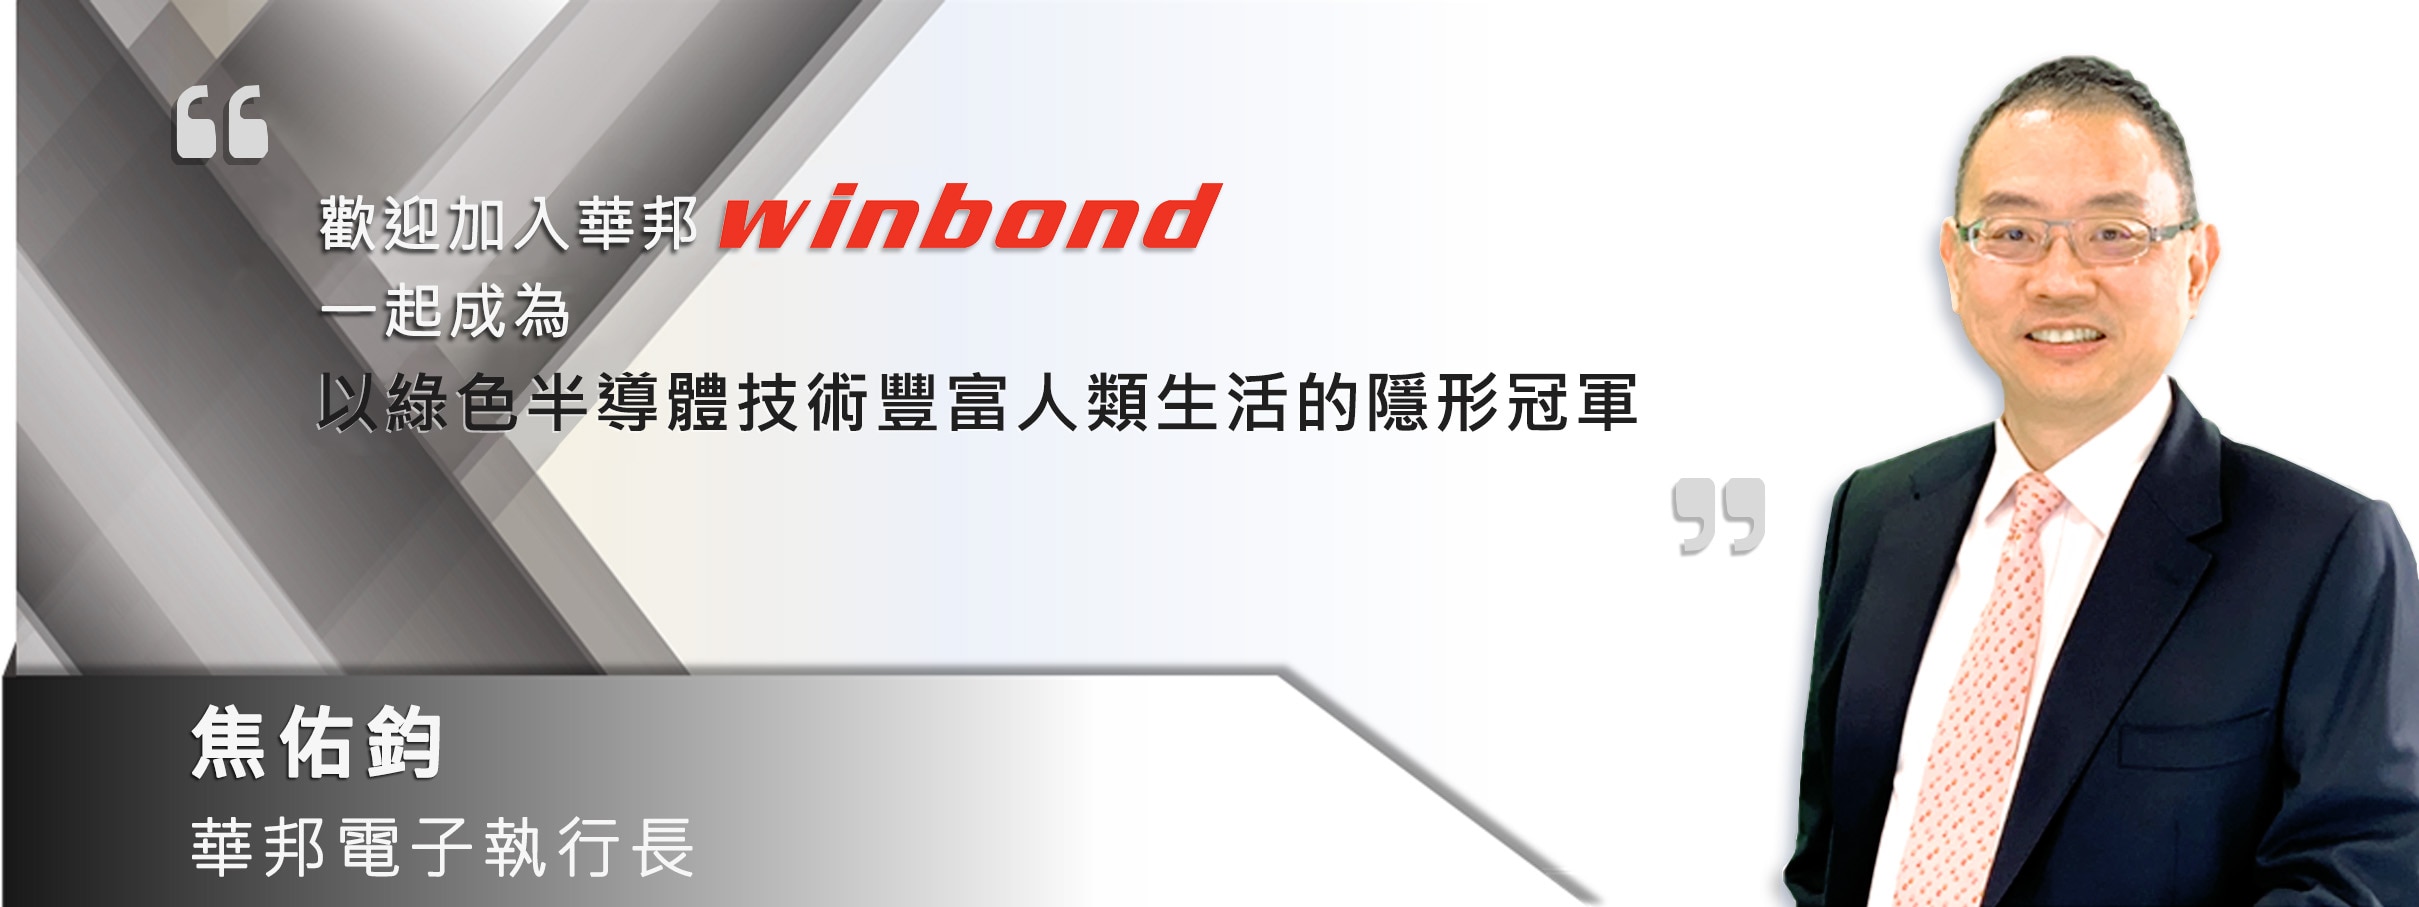 Join Winbond by CEO